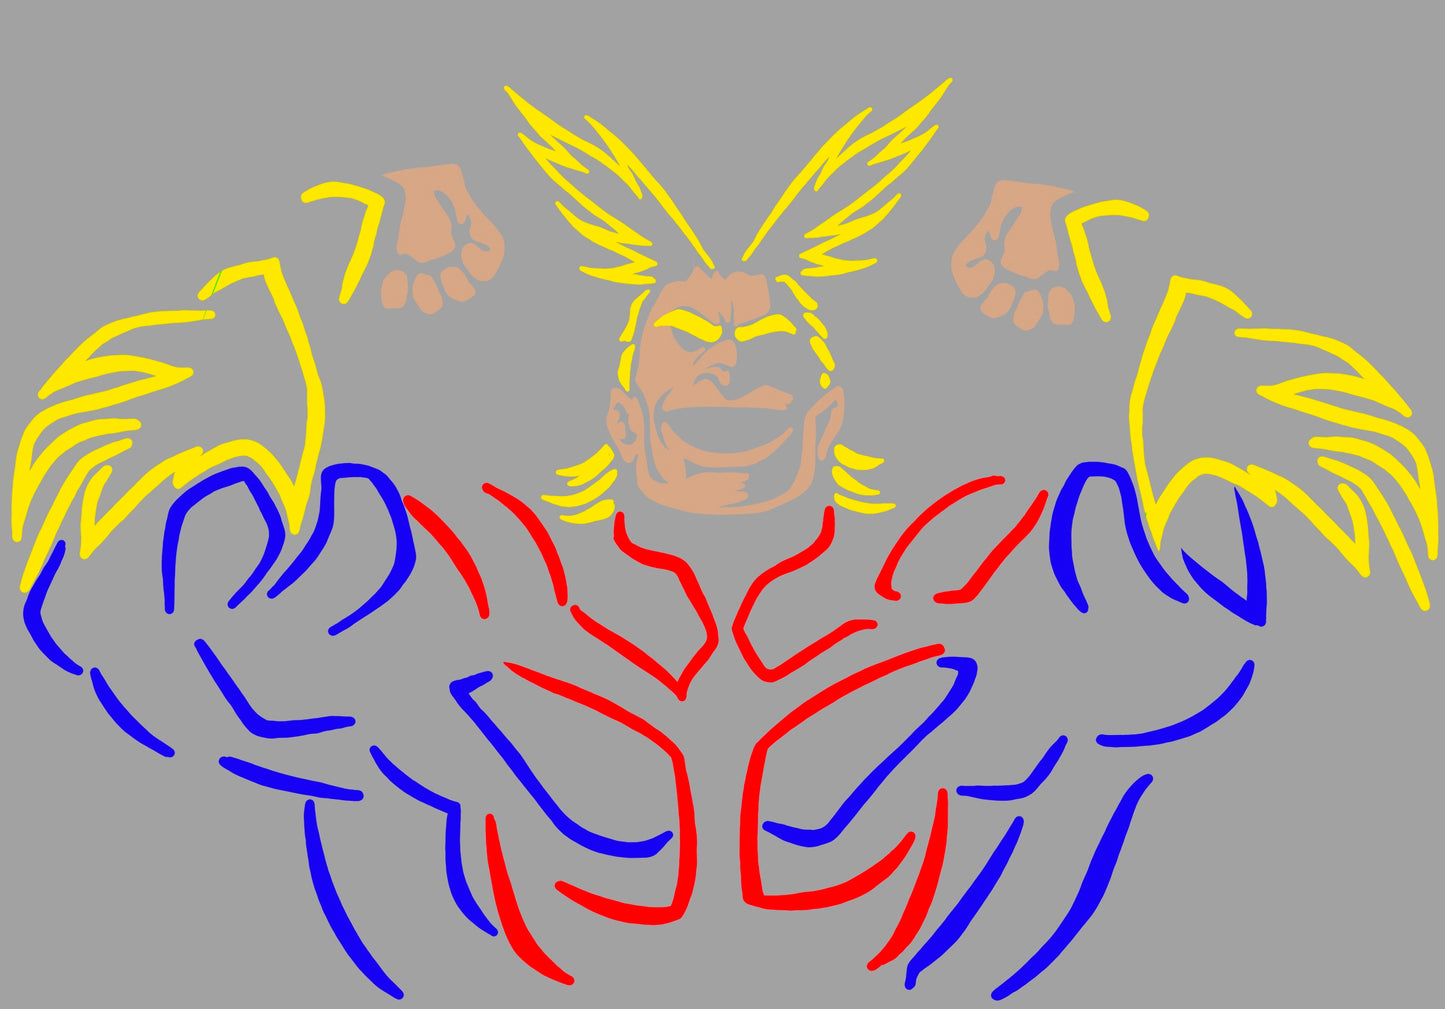 S4: ALL MIGHT